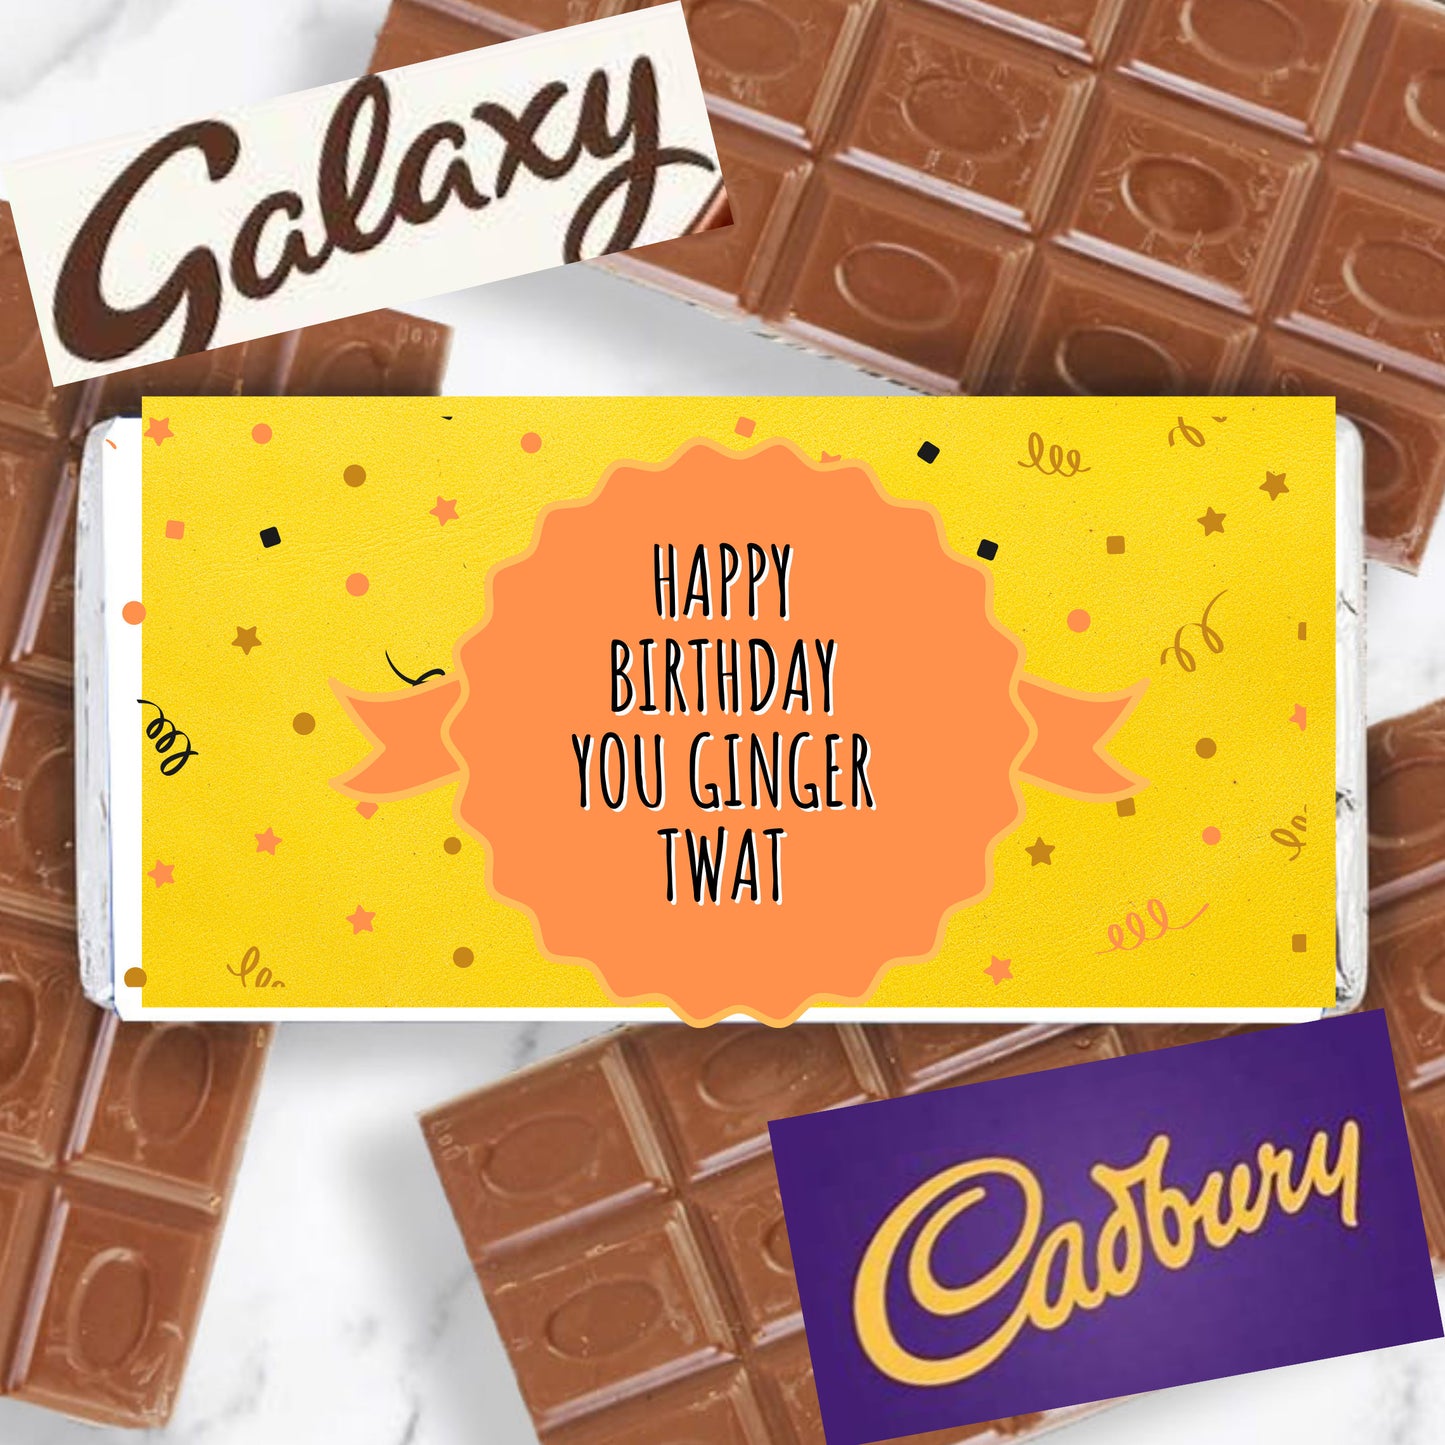 Happy Birthday You Ginger Twat. Covered Chocolate Bar